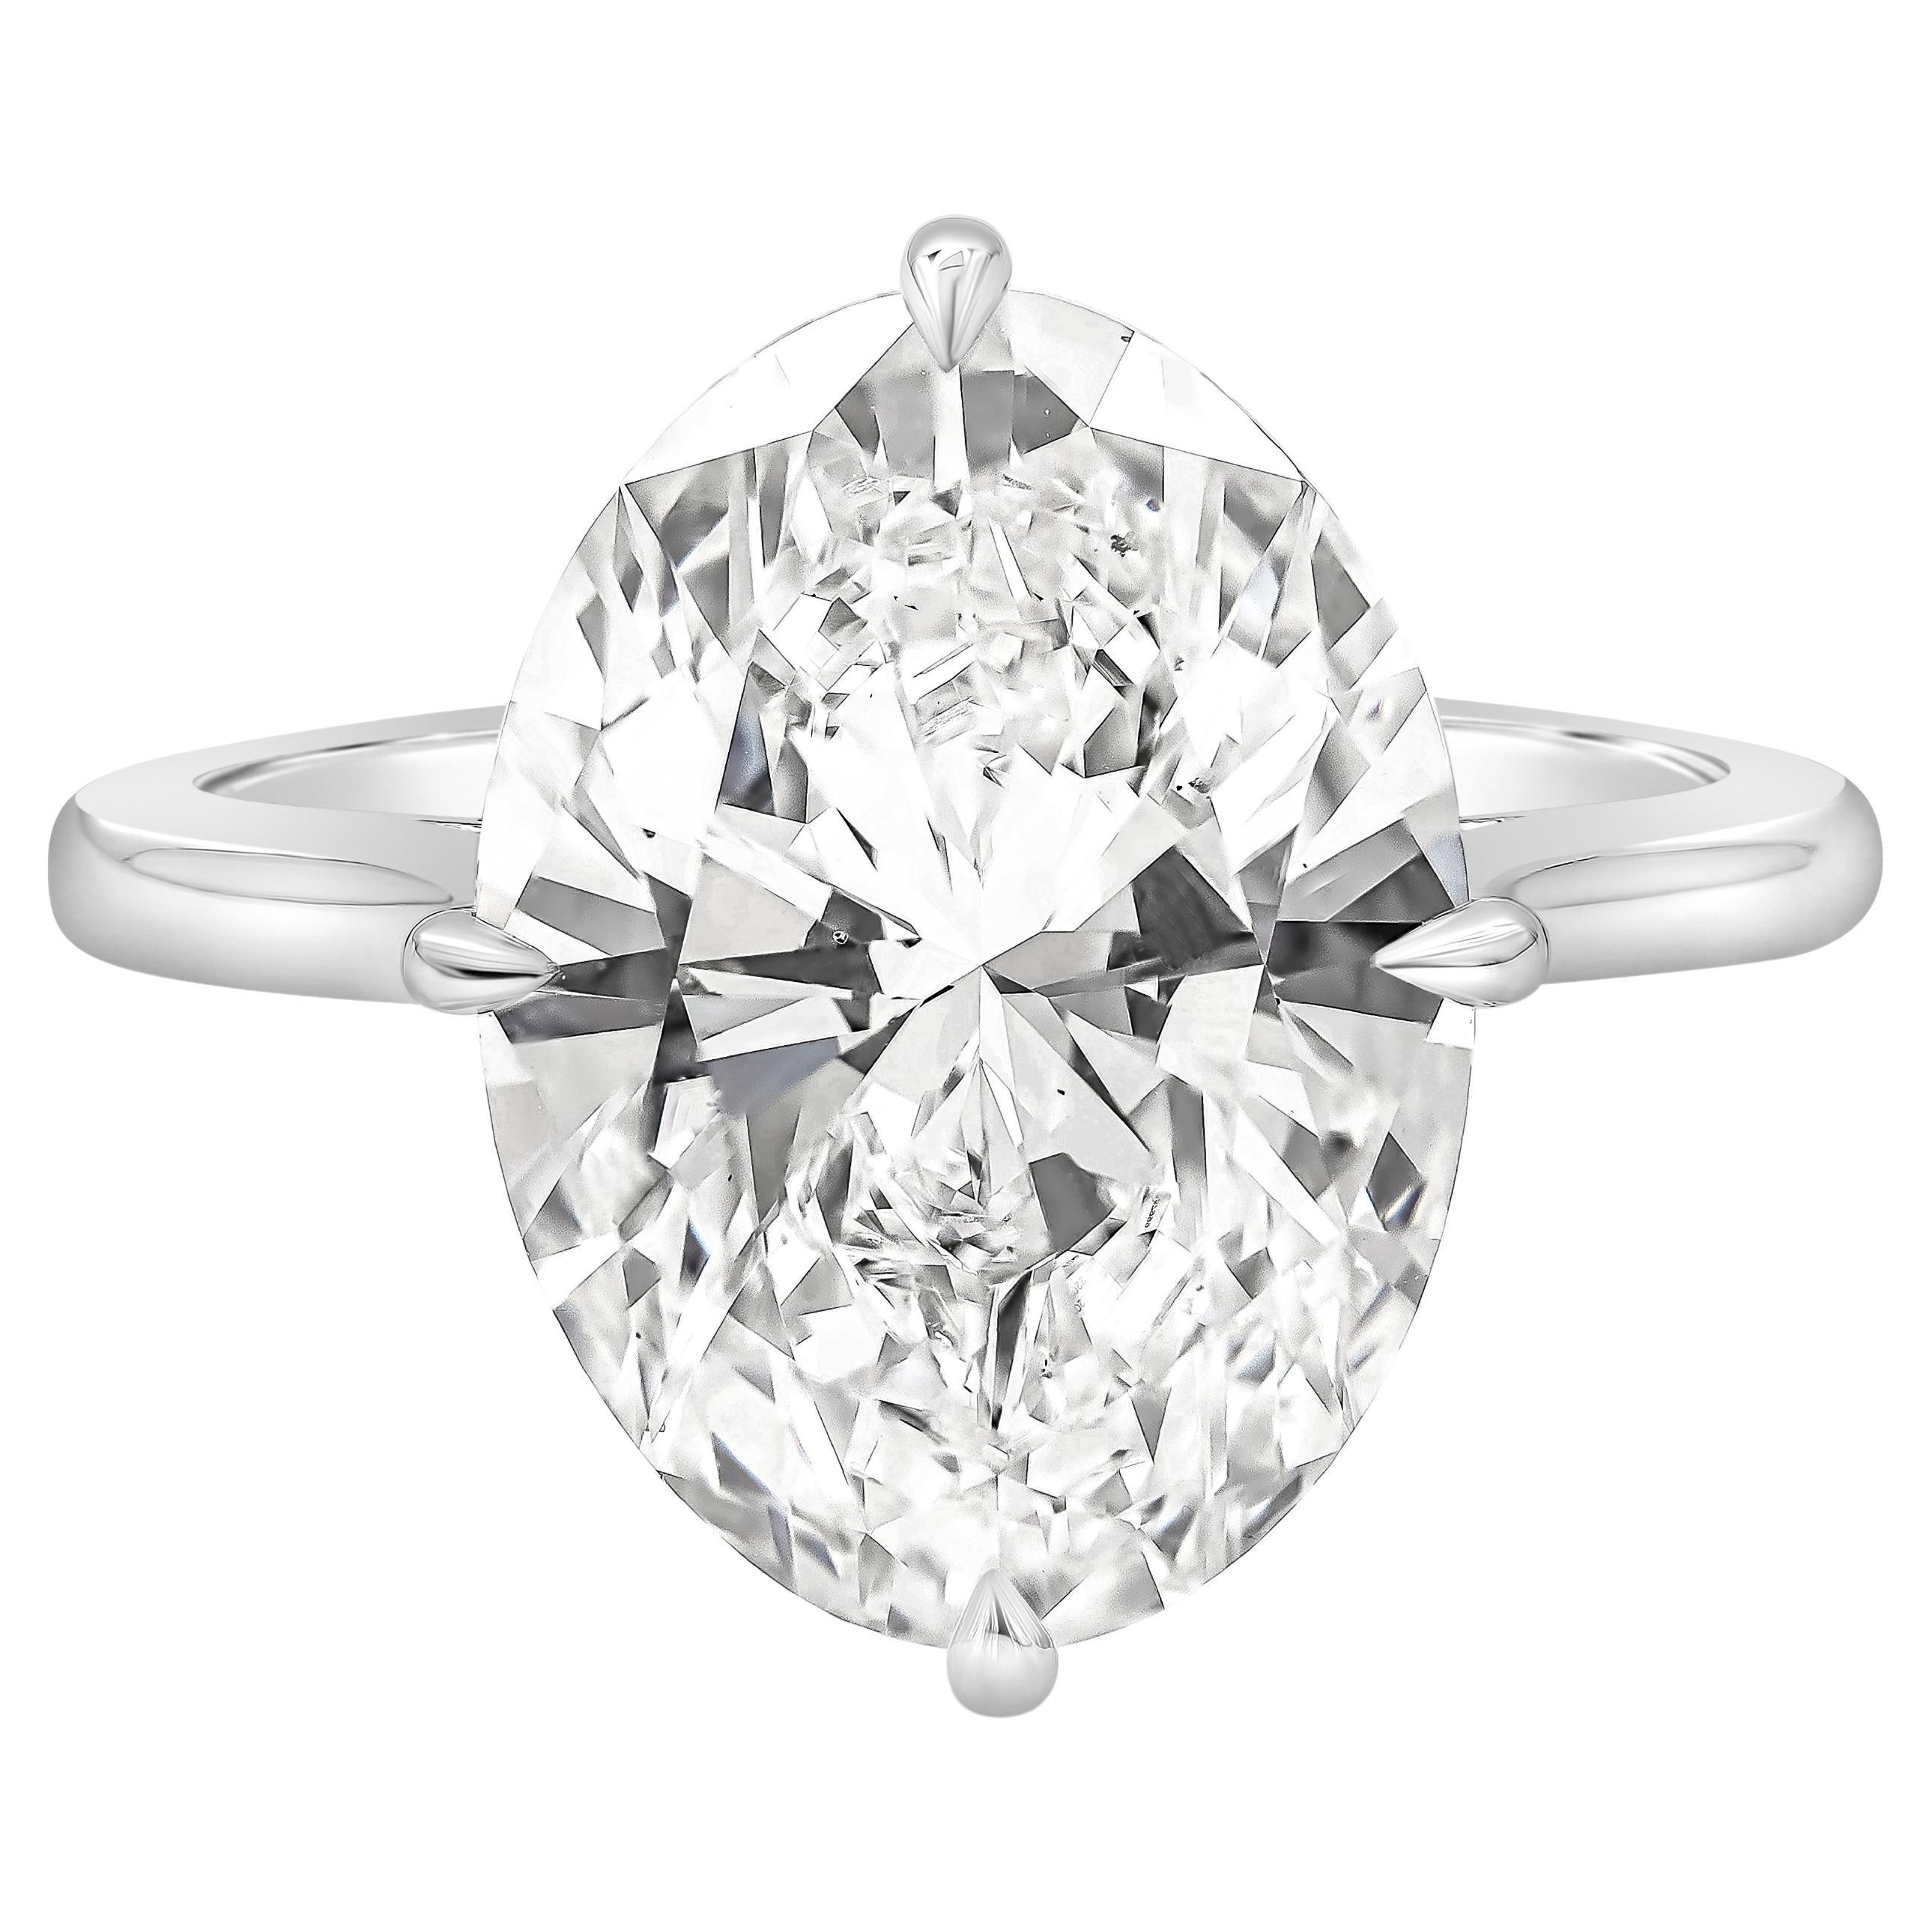 GIA Certified 7.04 Carats Total Oval Cut Diamond Solitaire Engagement Ring